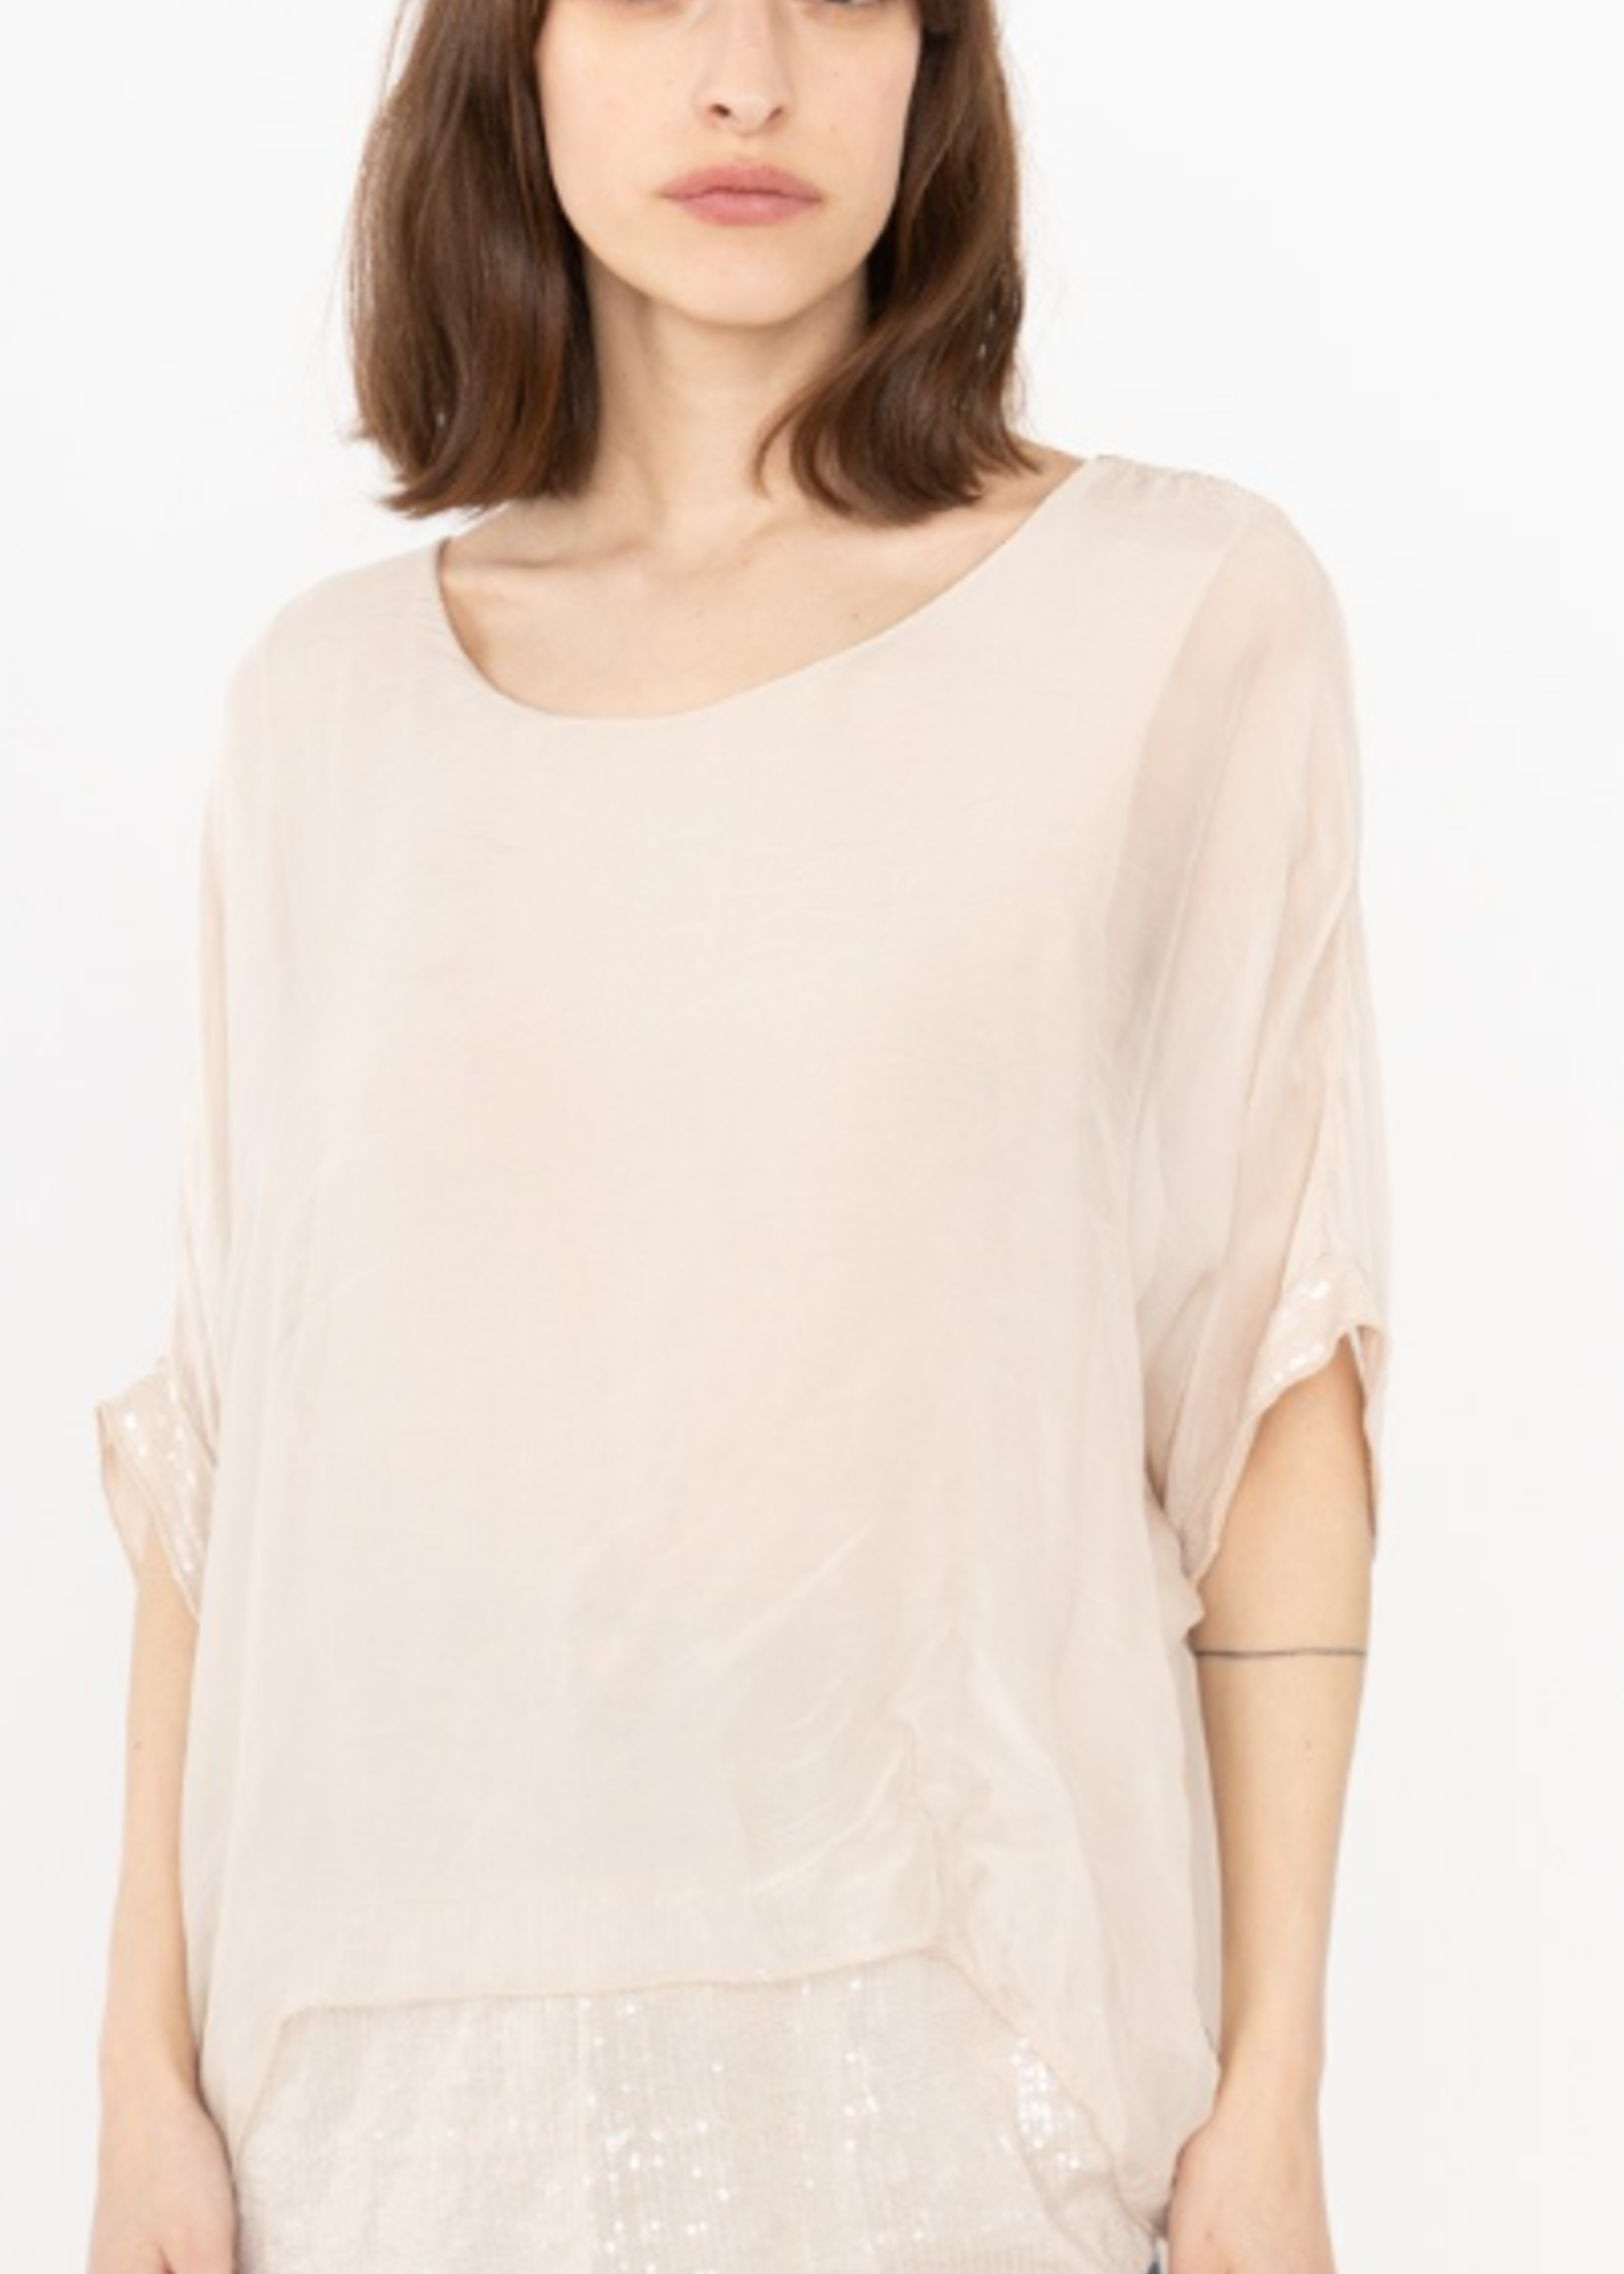 Sequins overlay top +3 colors